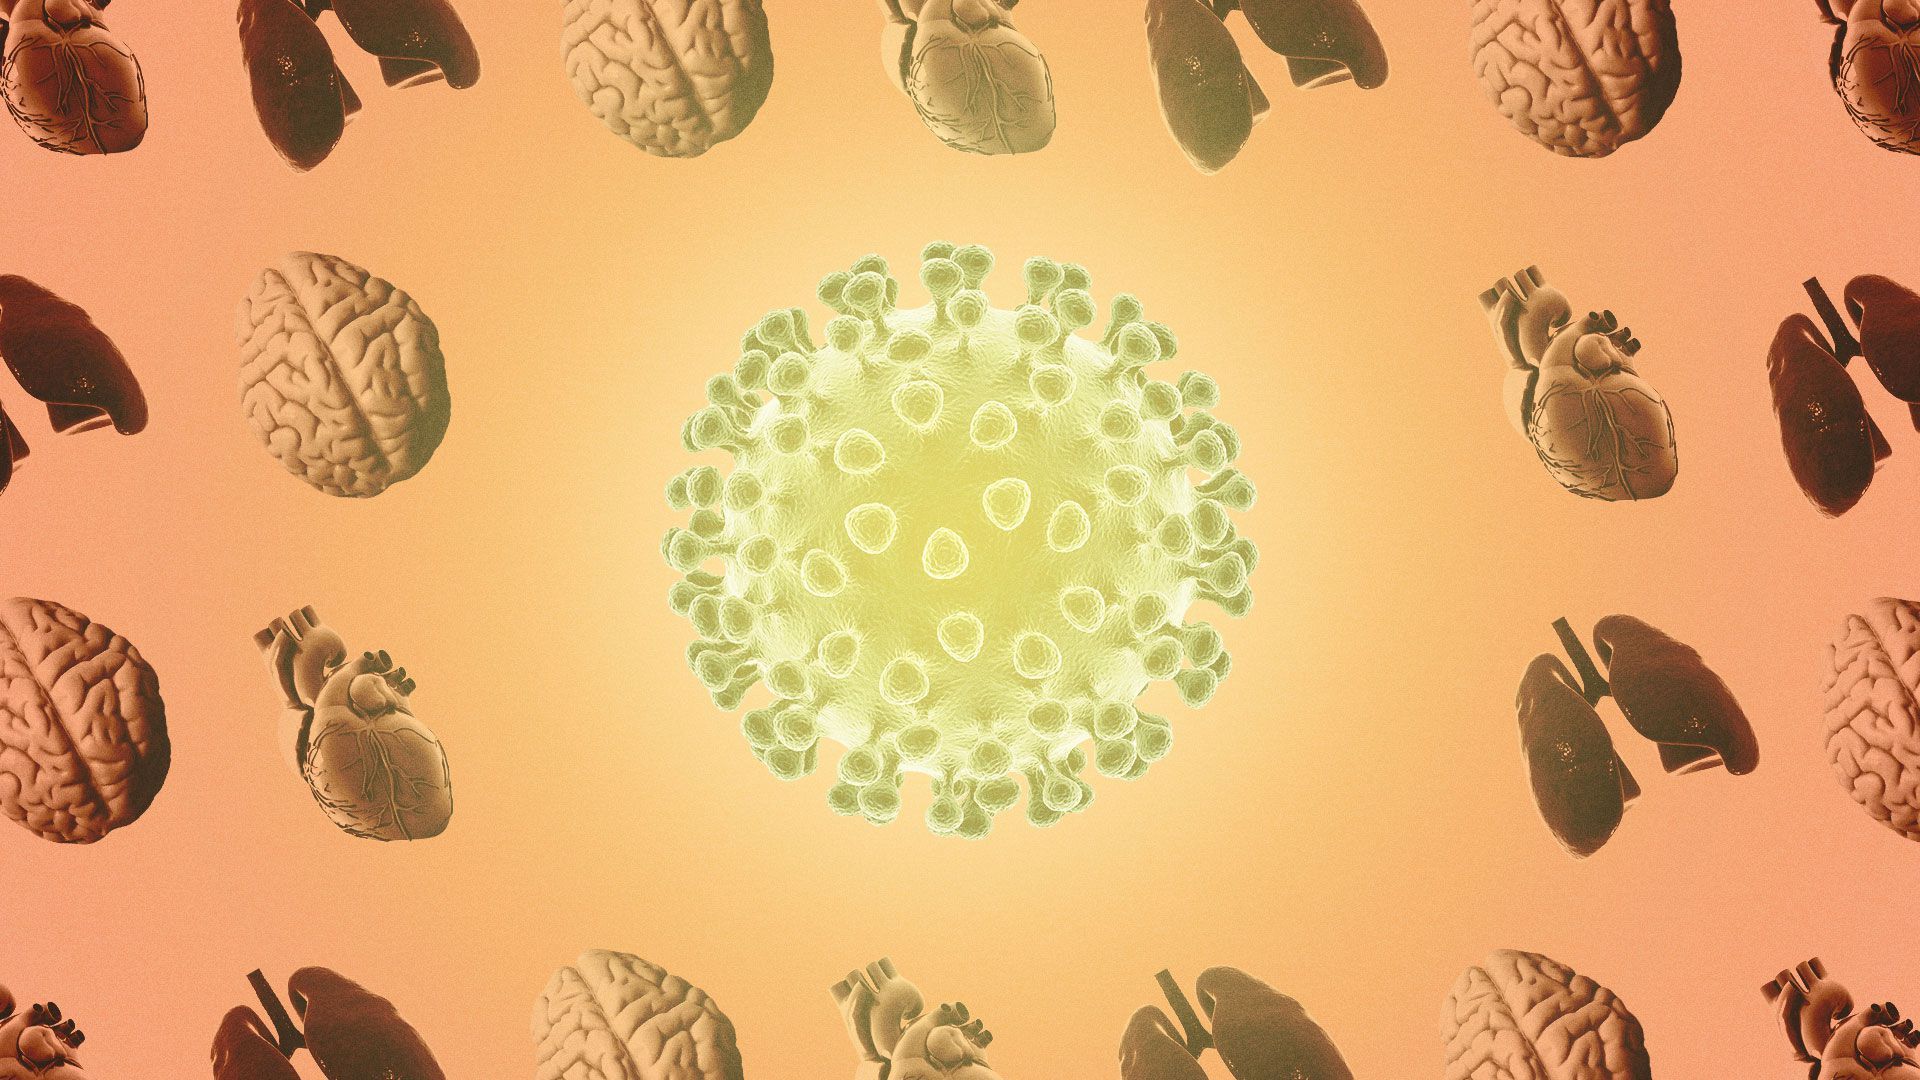 Illustration of coronavirus affecting a brain, lungs, and heart pattern